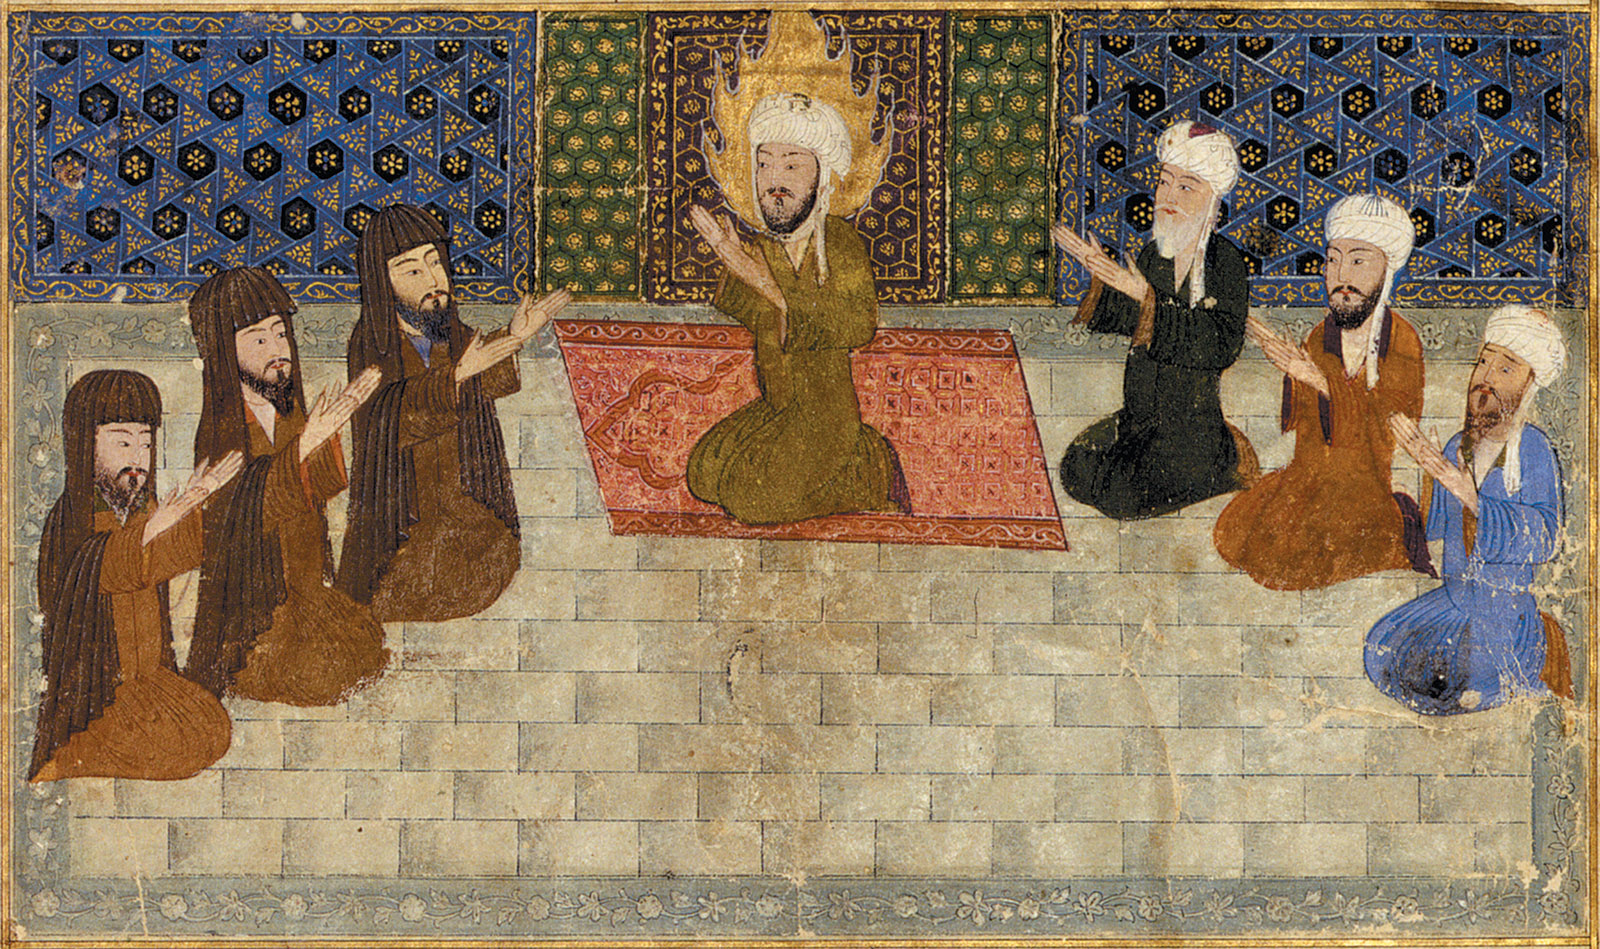 ‘Muhammad Leading the Prophets in Prayer at Al-Aqsa Mosque’; detail from a Book of Ascension (Mi‘rajnama), probably Herat (present-day Afghanistan), circa 1436